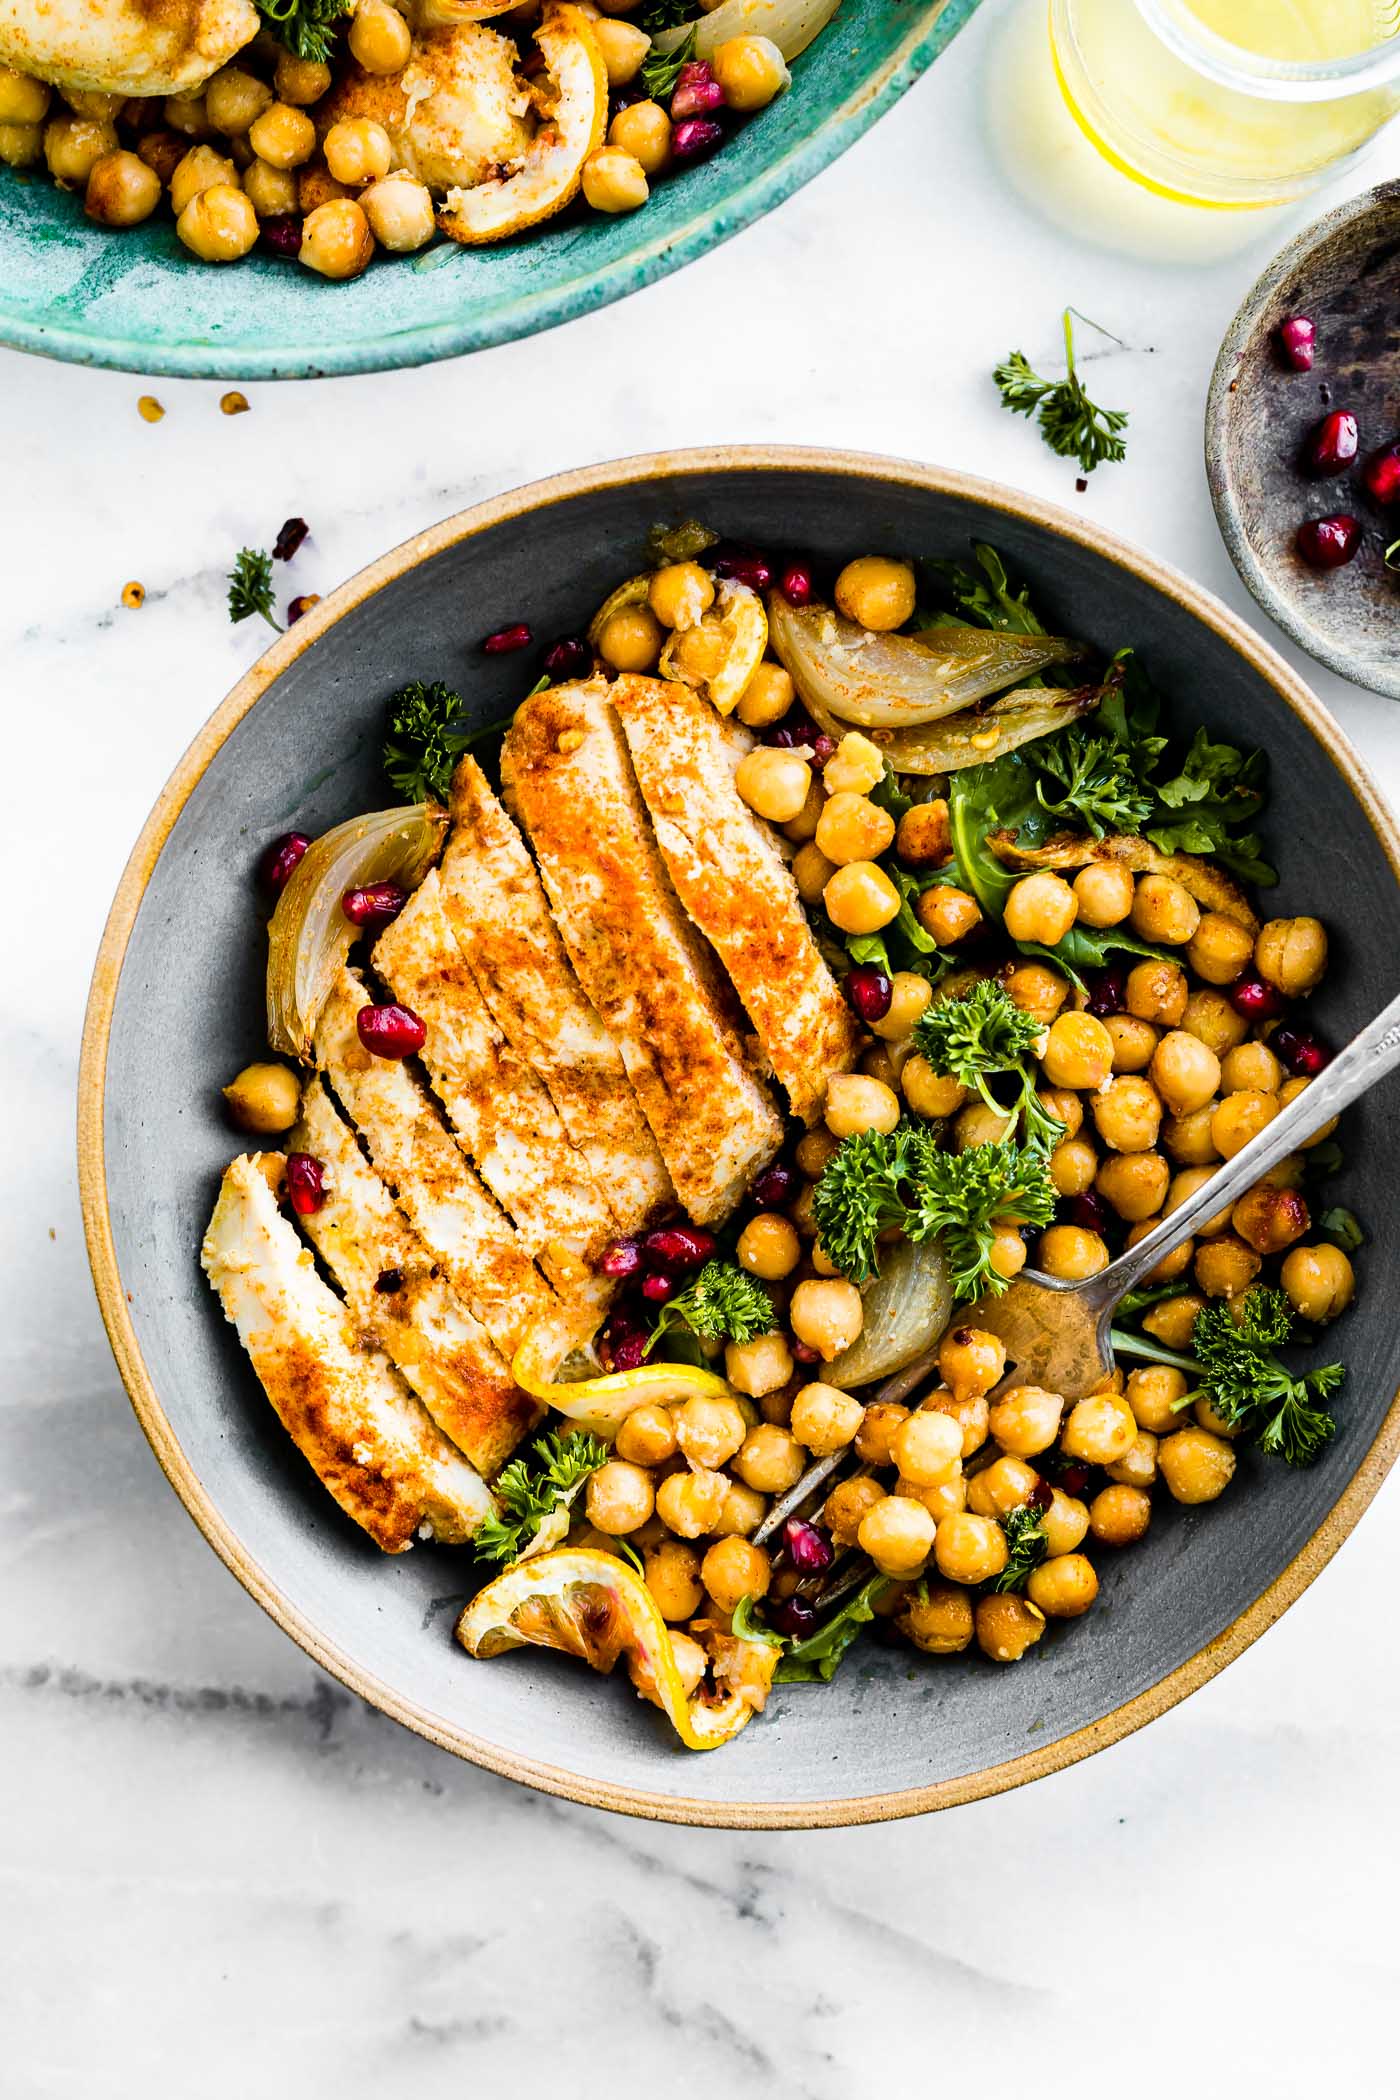 Cumin roasted chicken, sliced in turquoise bowl with roasted chickpeas and greens.